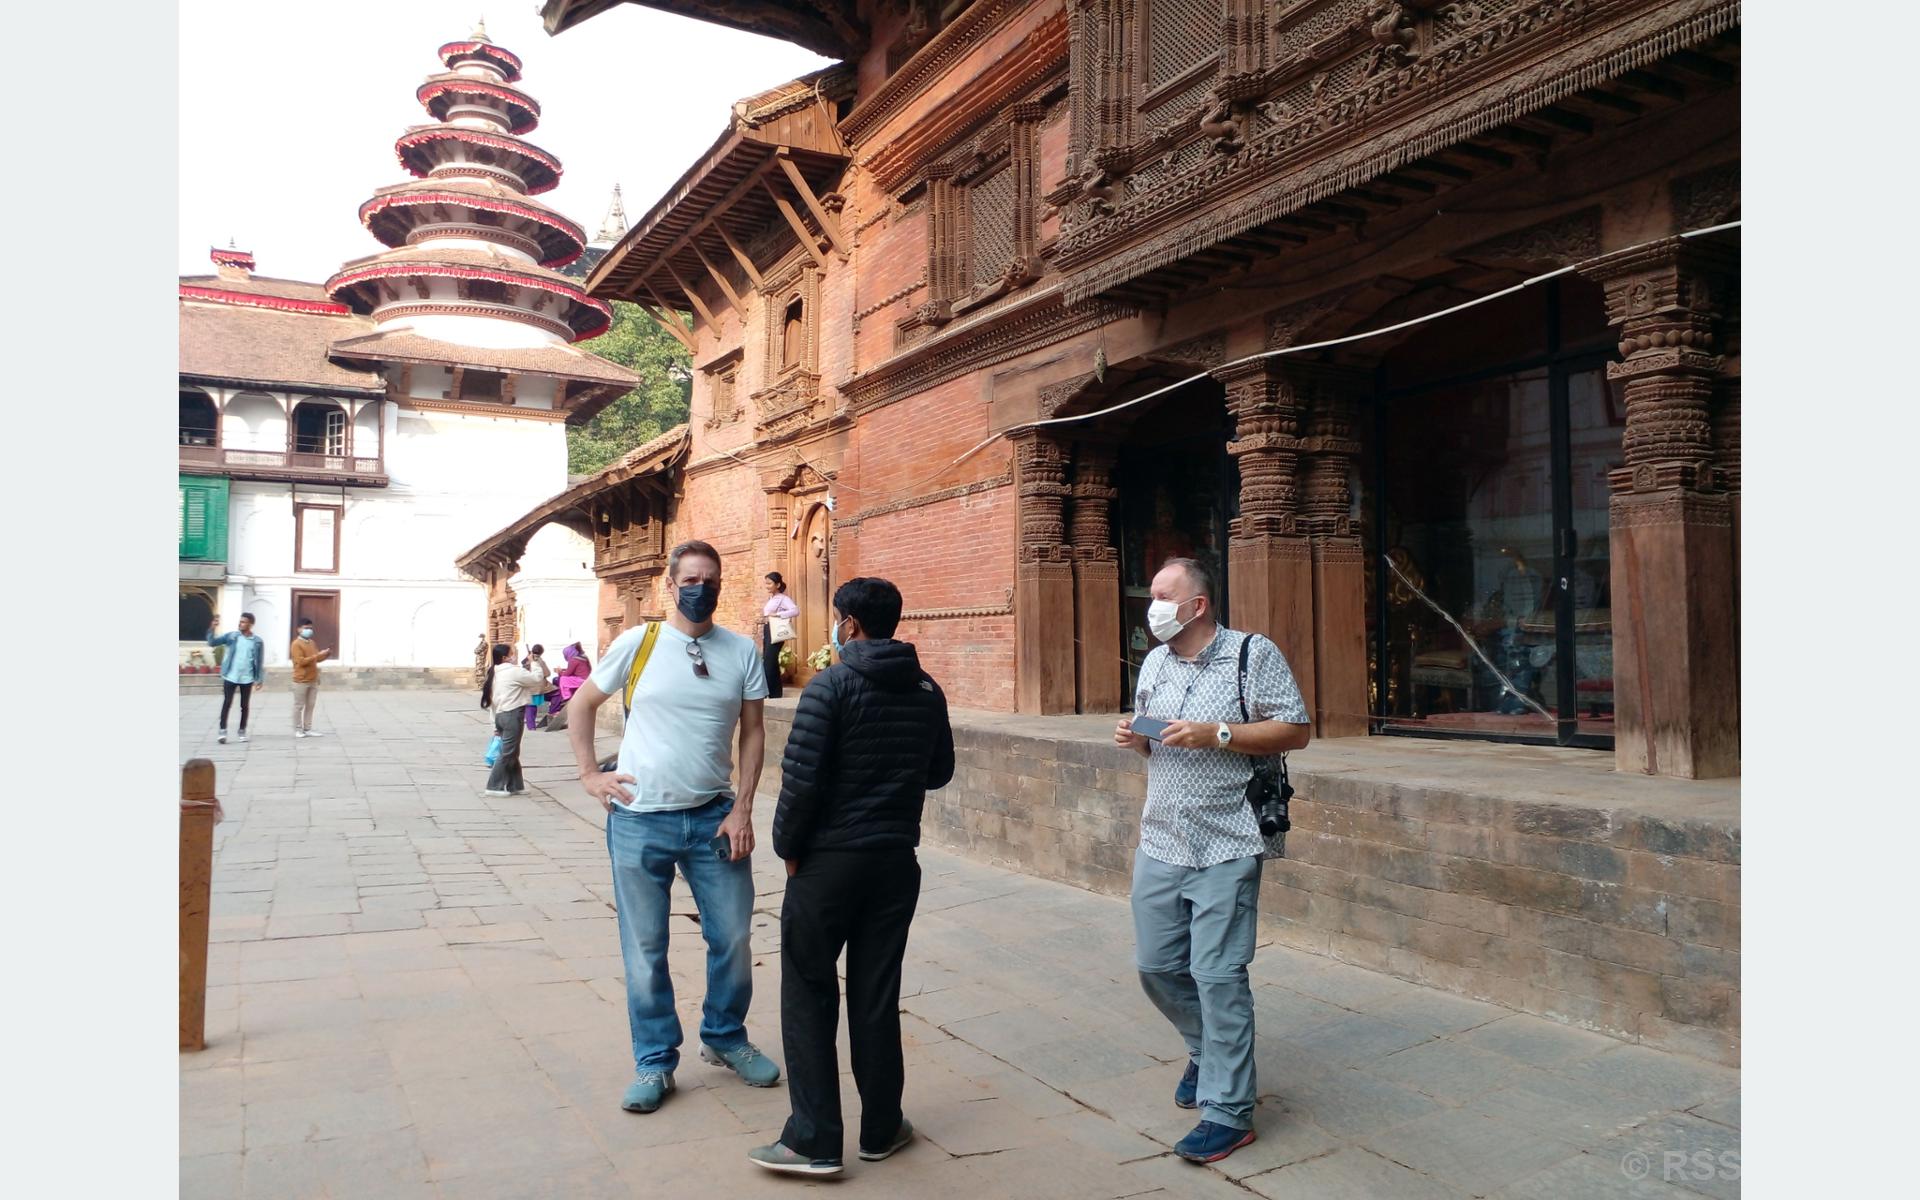 Nepal sees 126,000 tourists in last 11 months